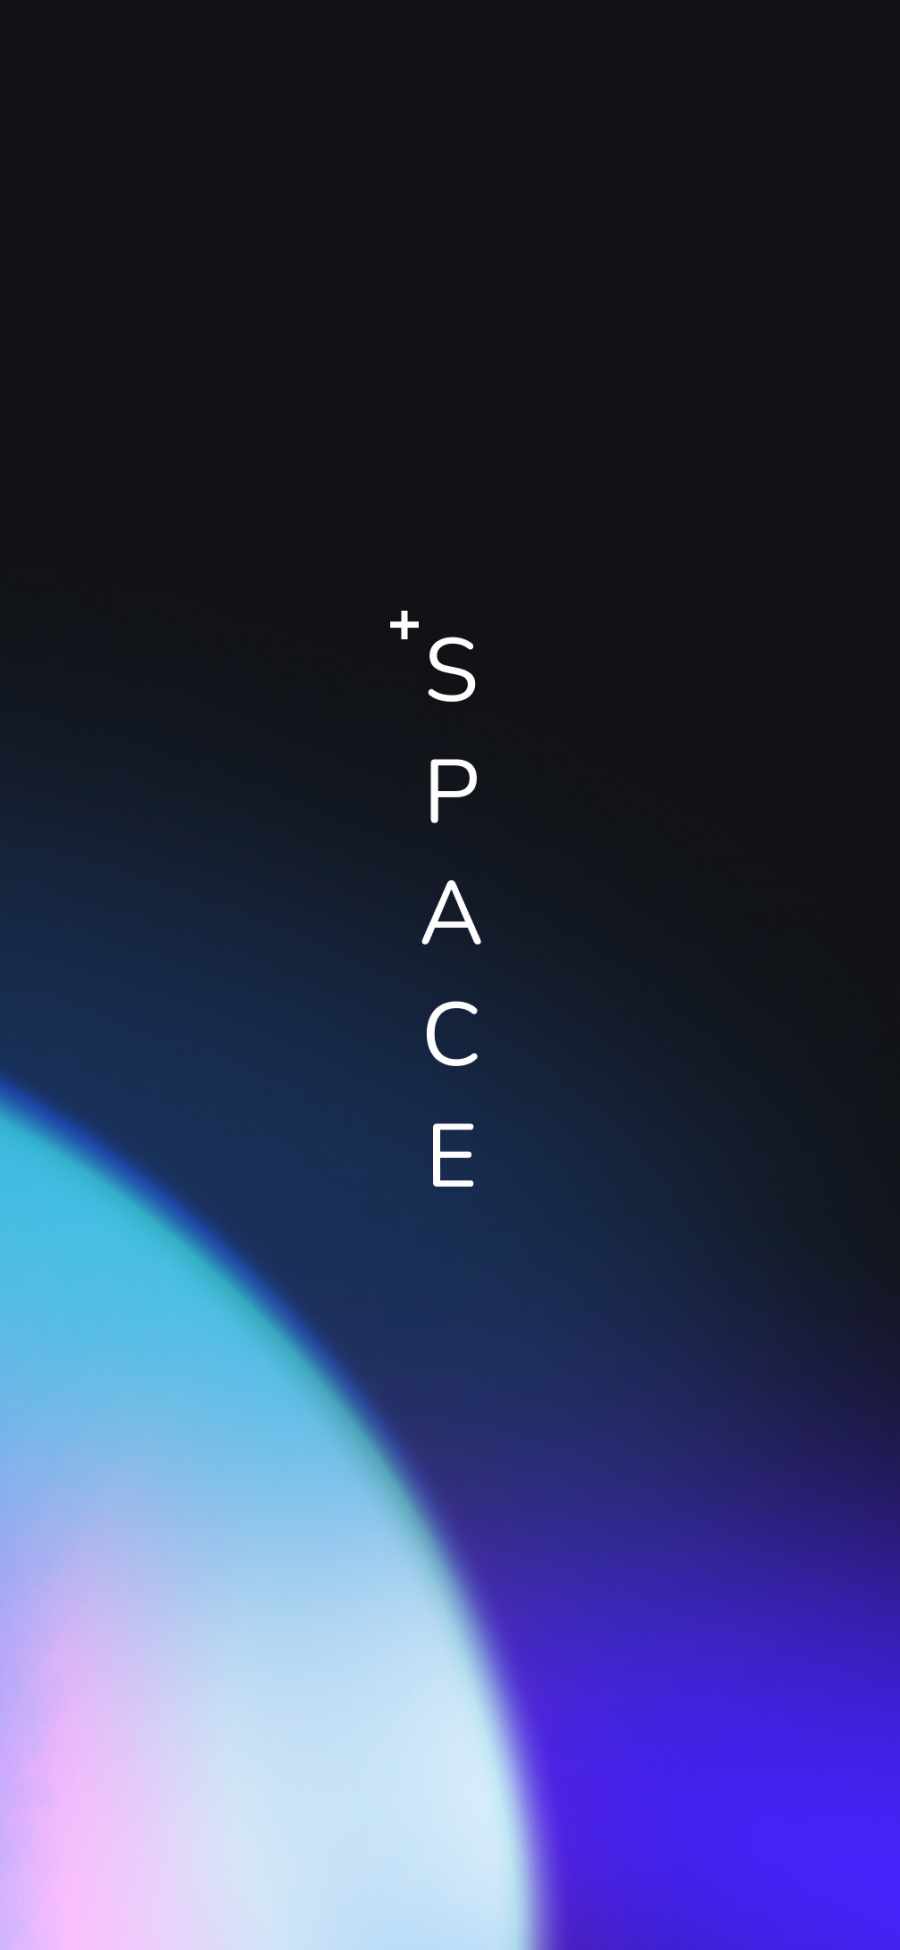 More Space iPhone Wallpaper